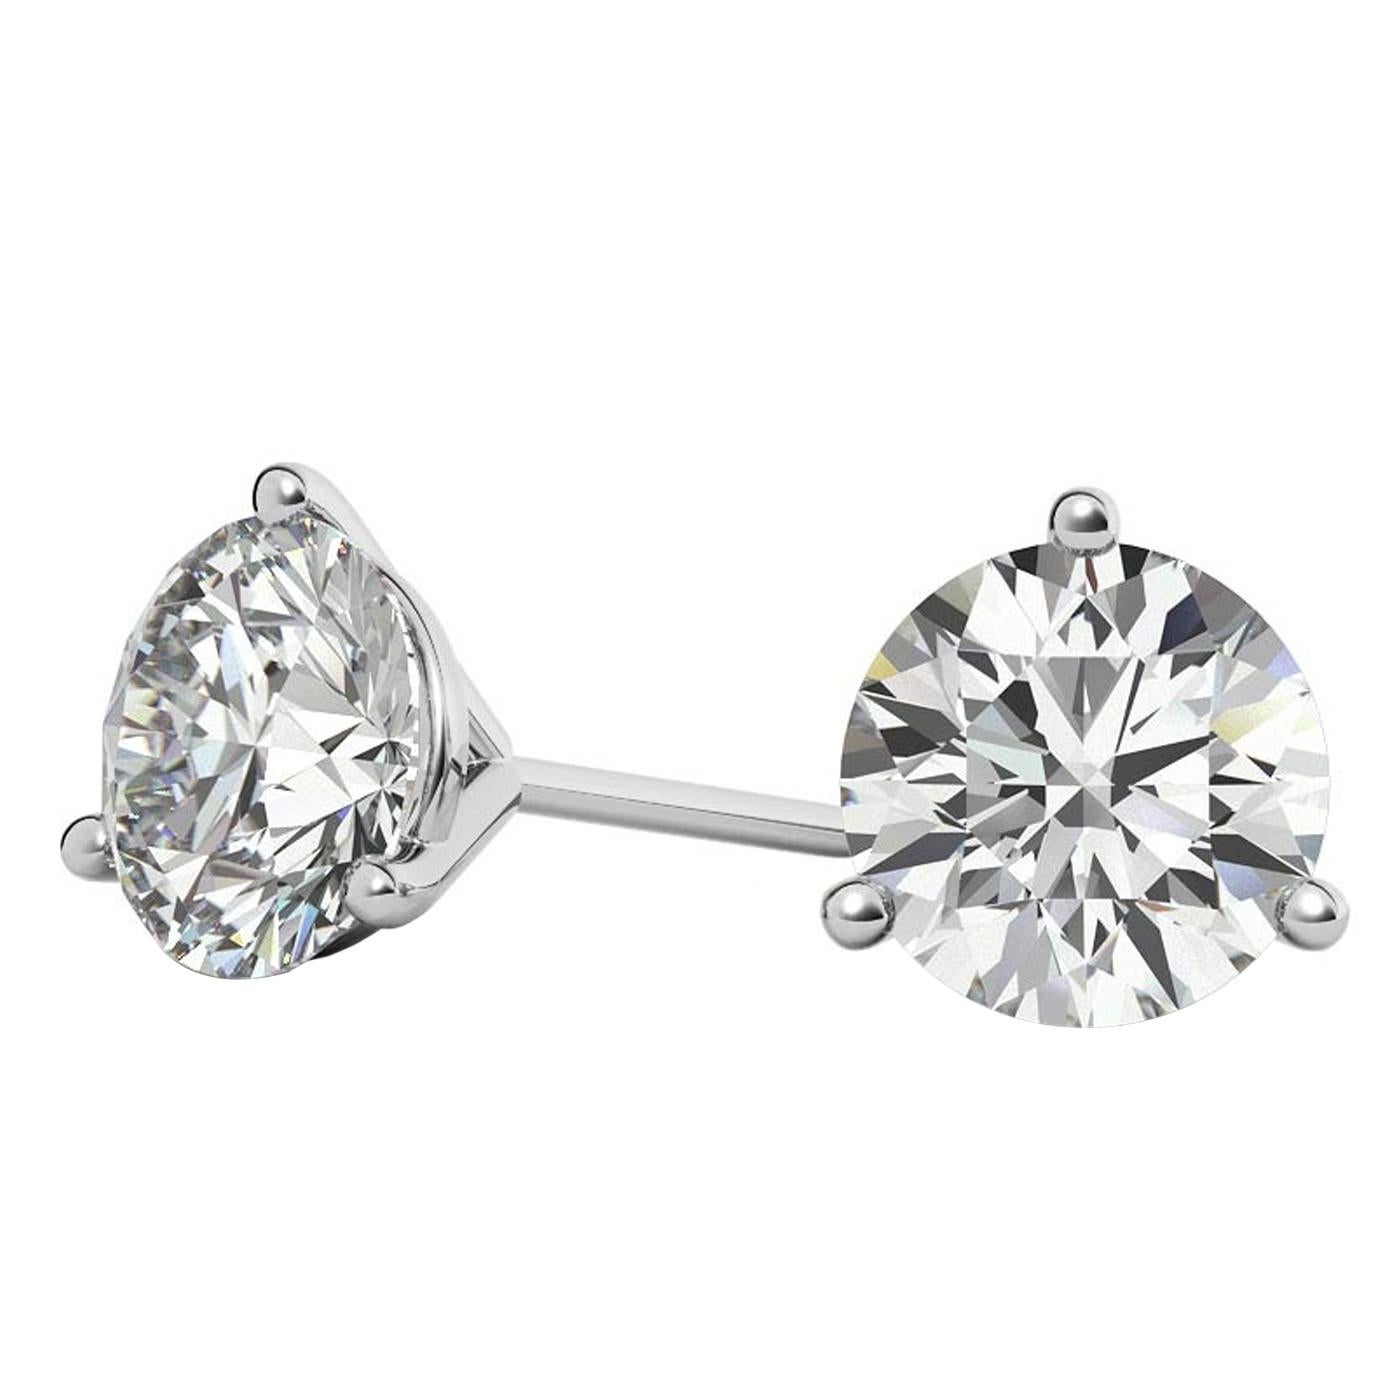 This classic pair of Natural diamond stud earrings features two gorgeous round brilliant cut diamonds. These diamonds weigh 1.01 and 1.00 with (H color), (SI2/SI3) clarity. They are elegantly set in Martini-style 3-prong settings. These diamonds are